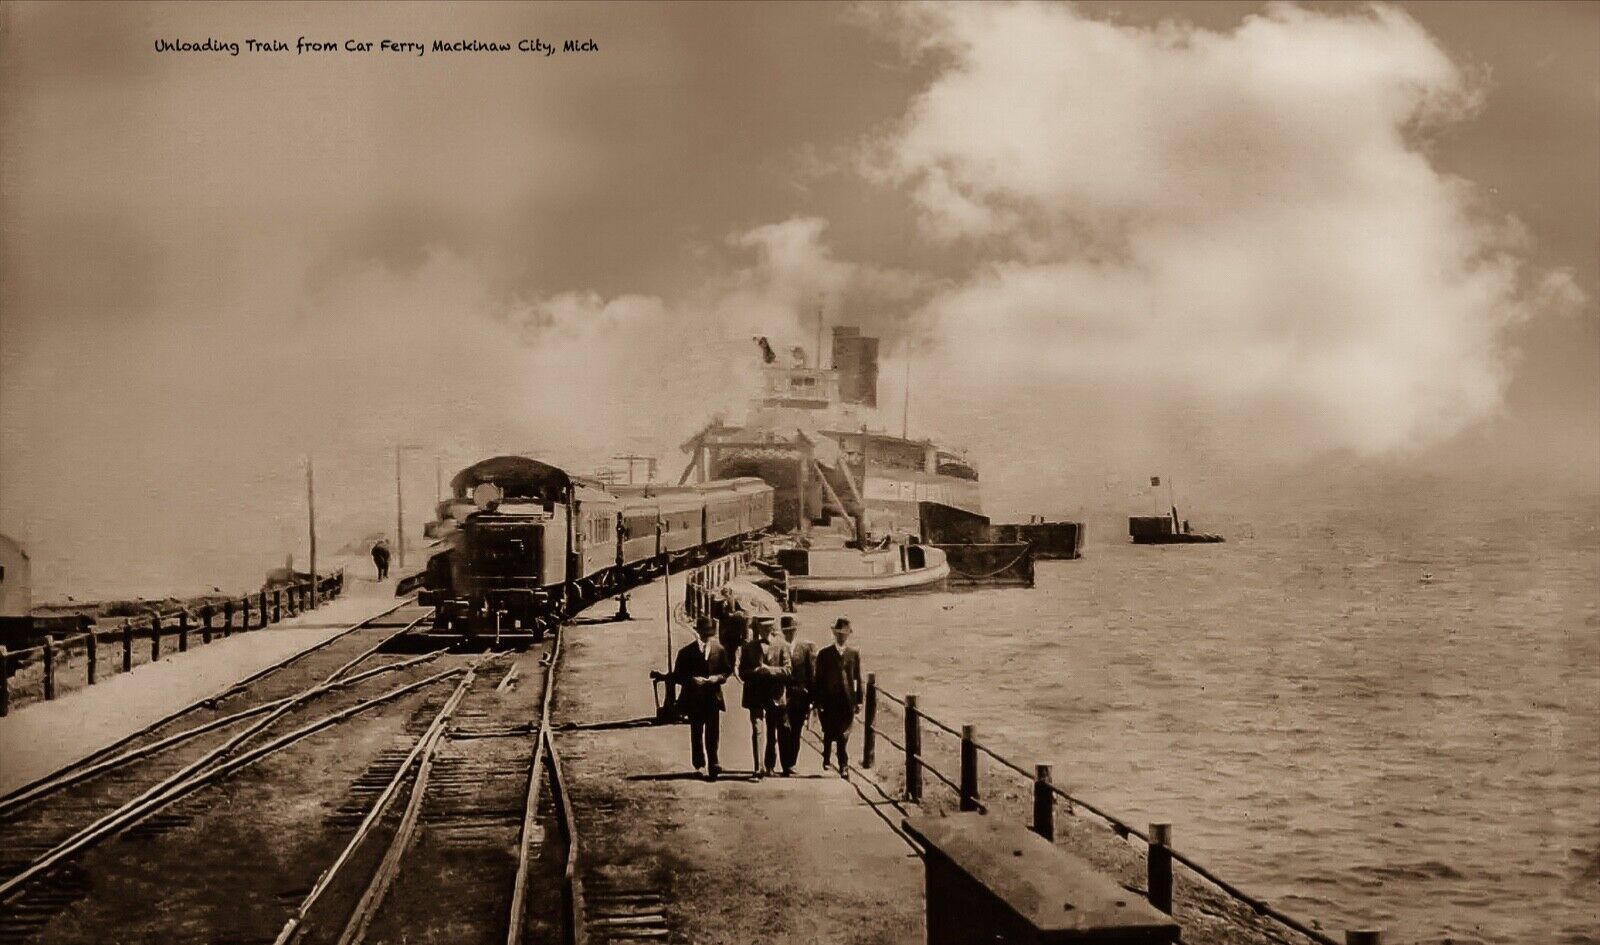 RPPC Photo Mackinaw City, Mich. Unloading Train Cars from Ferry, Steamship